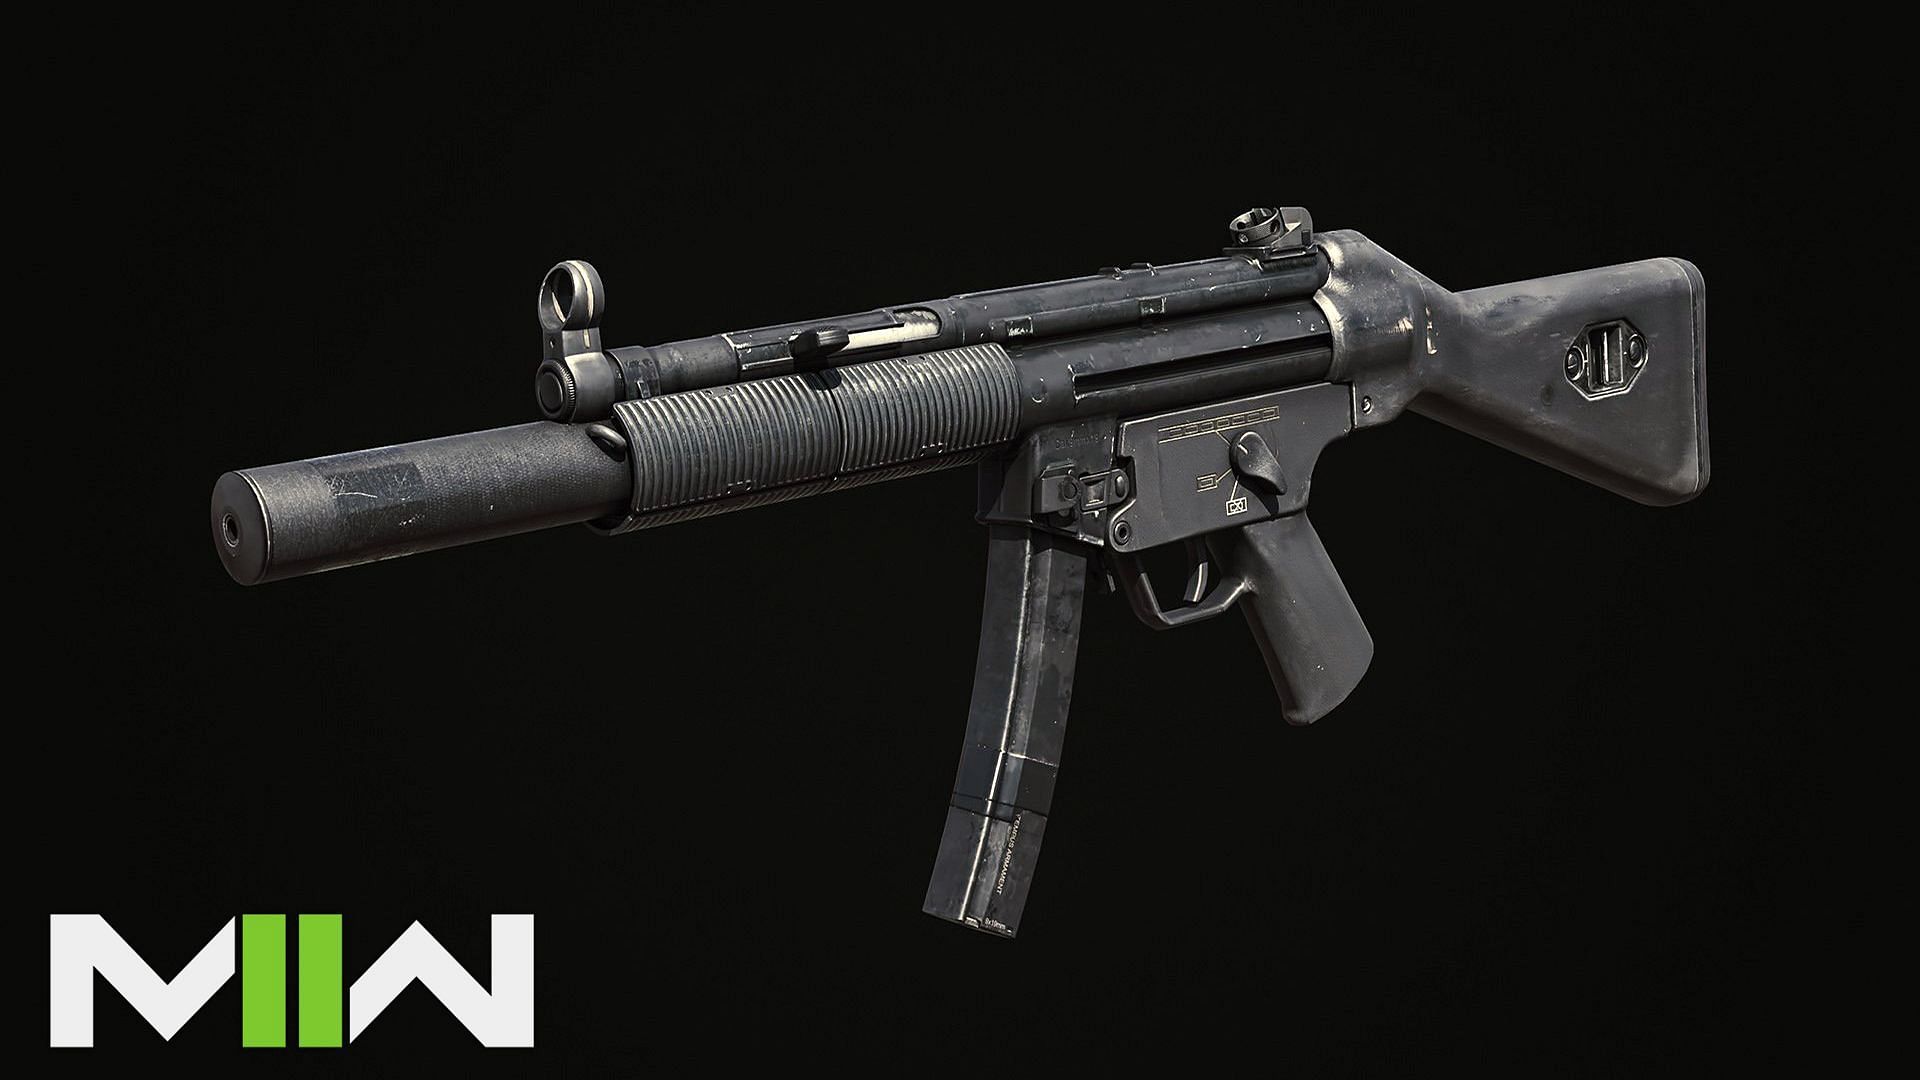 MP5SD with a black background and a MW2 logo at the bottom left corner.